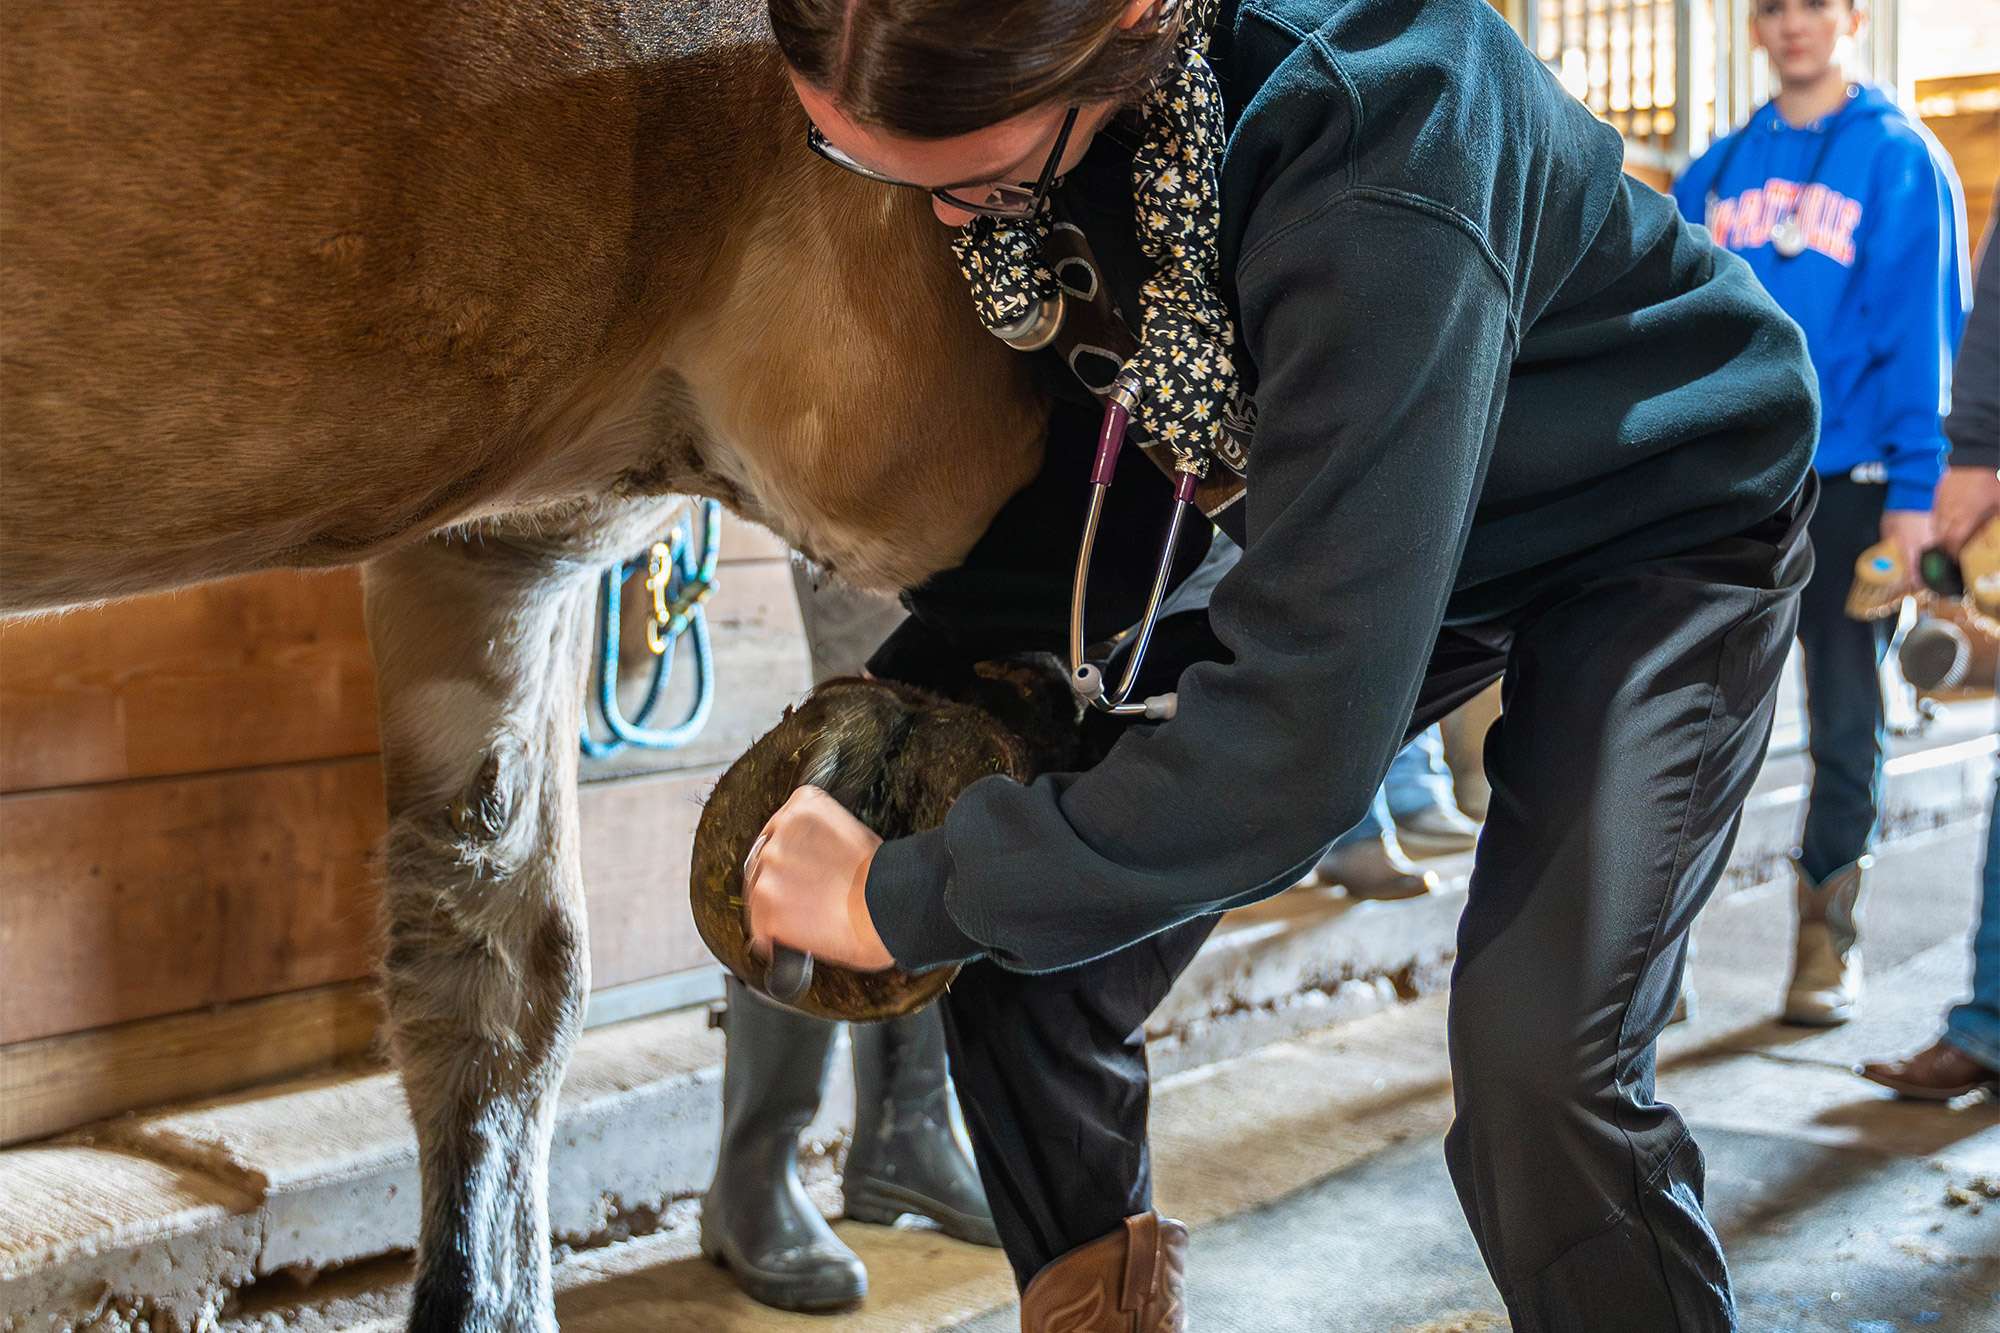 A Veterinary Technician holds a horses right leg up in the air and cleans the hoof of the horse.